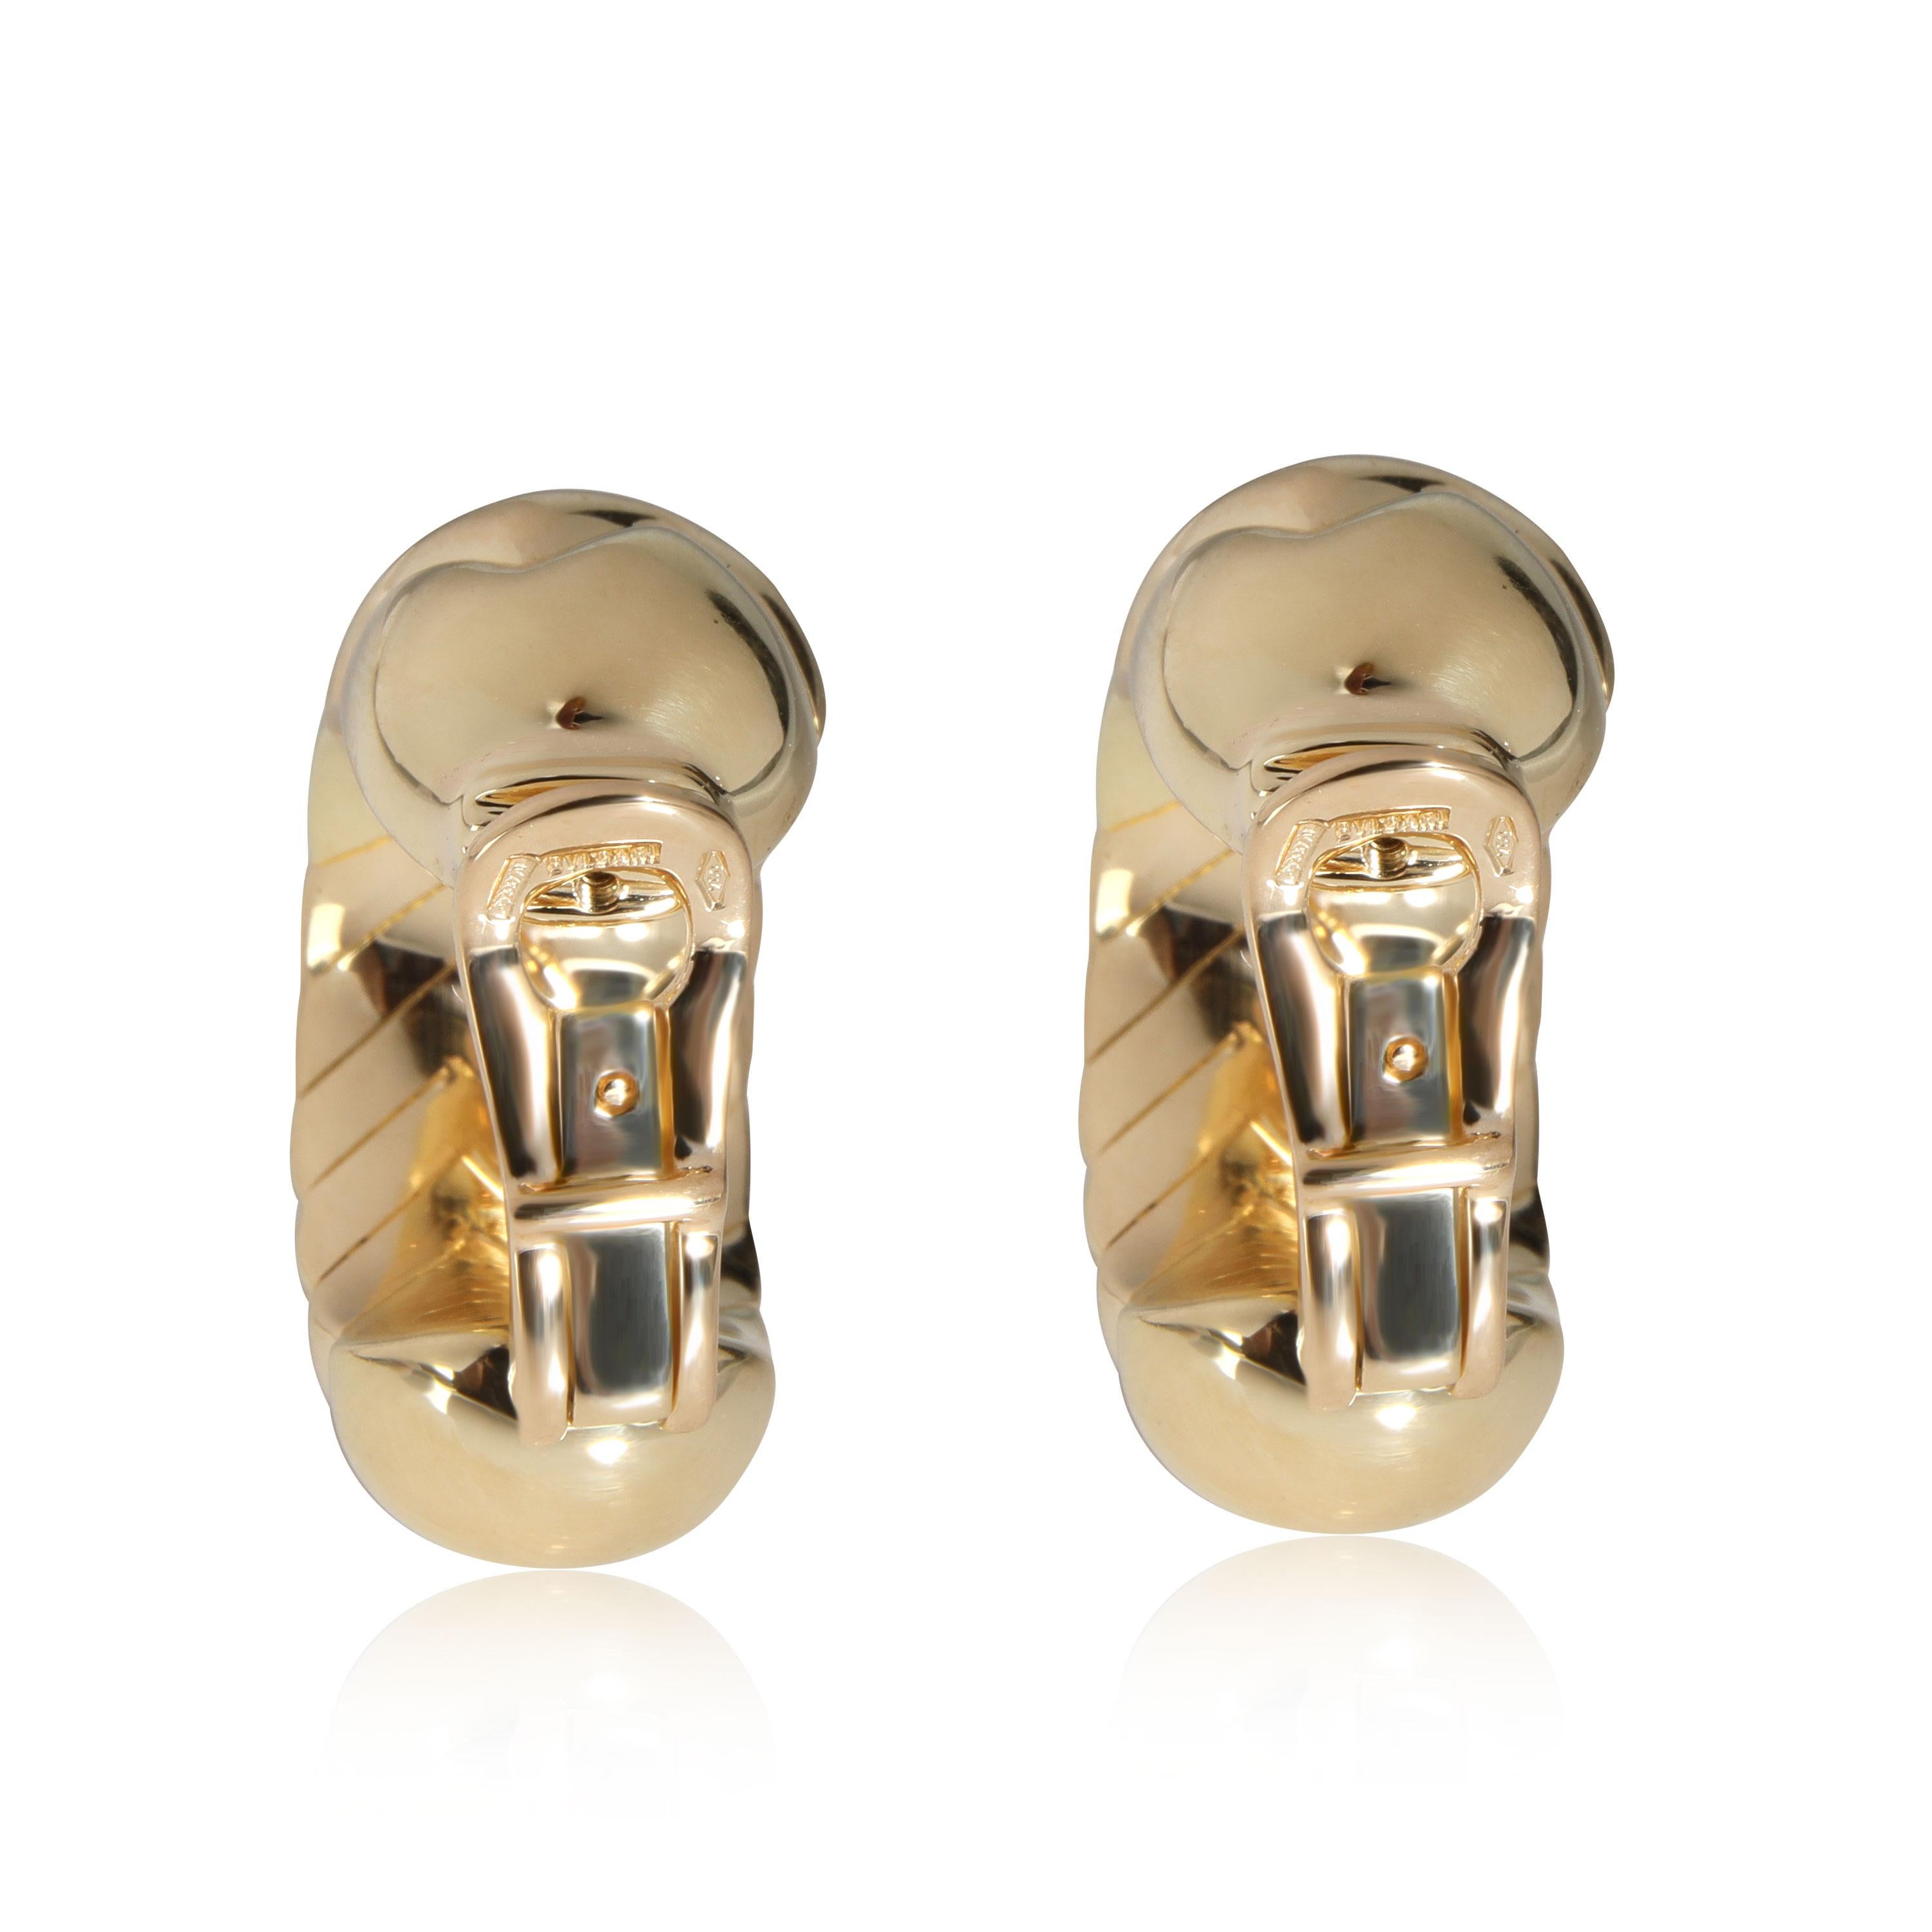 Bulgari Spiga Diamond Earrings in 18K Yellow Gold 1.20 CTW

PRIMARY DETAILS
SKU: 111571
Listing Title: Bulgari Spiga Diamond Earrings in 18K Yellow Gold 1.20 CTW
Condition Description: Retails for 10,000 USD. In excellent condition and recently